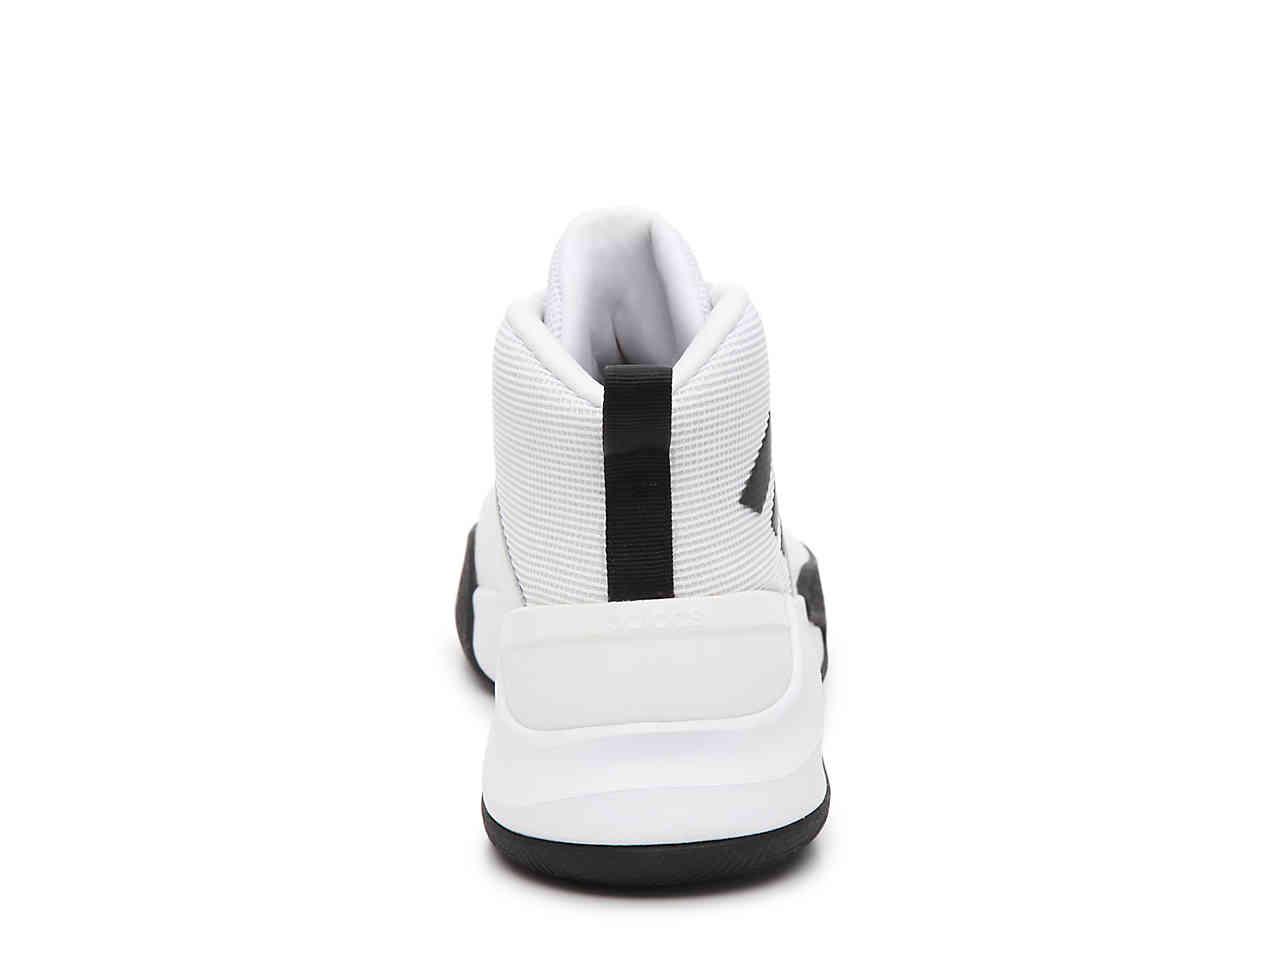 adidas Leather Ownthegame Basketball Shoe in White/Black (White) for ...